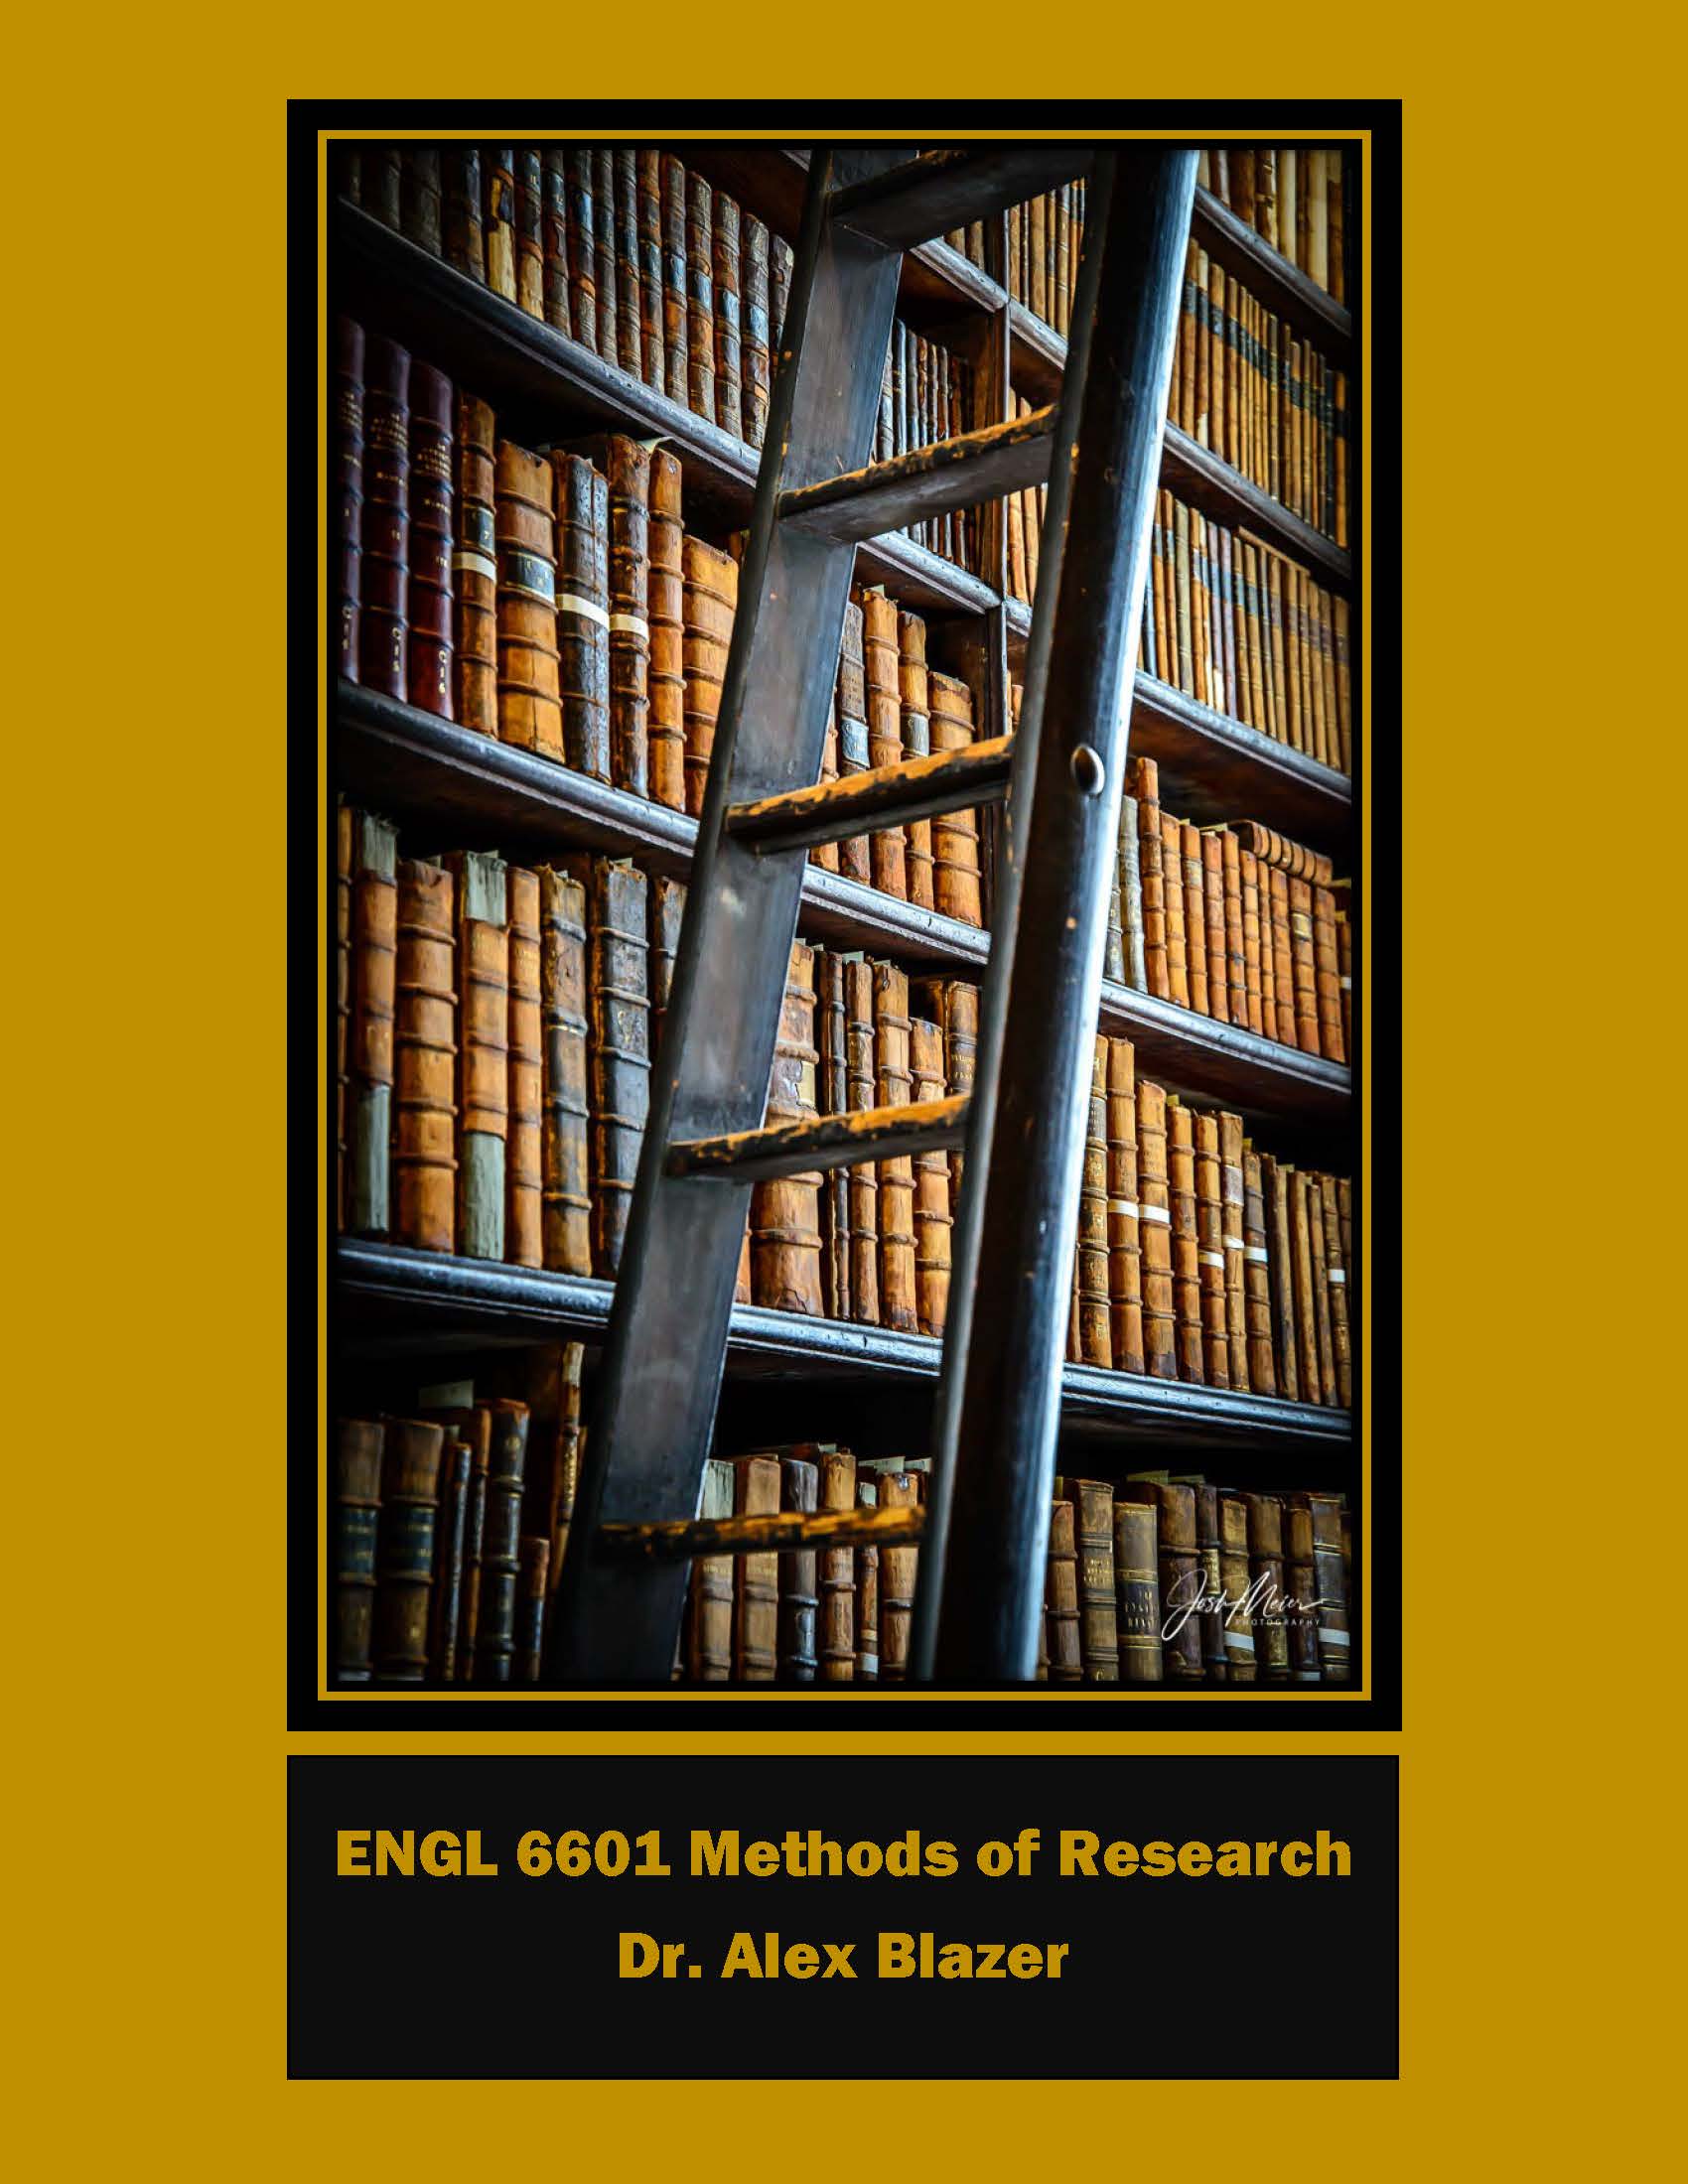 ENGL 6601 Methods of Research